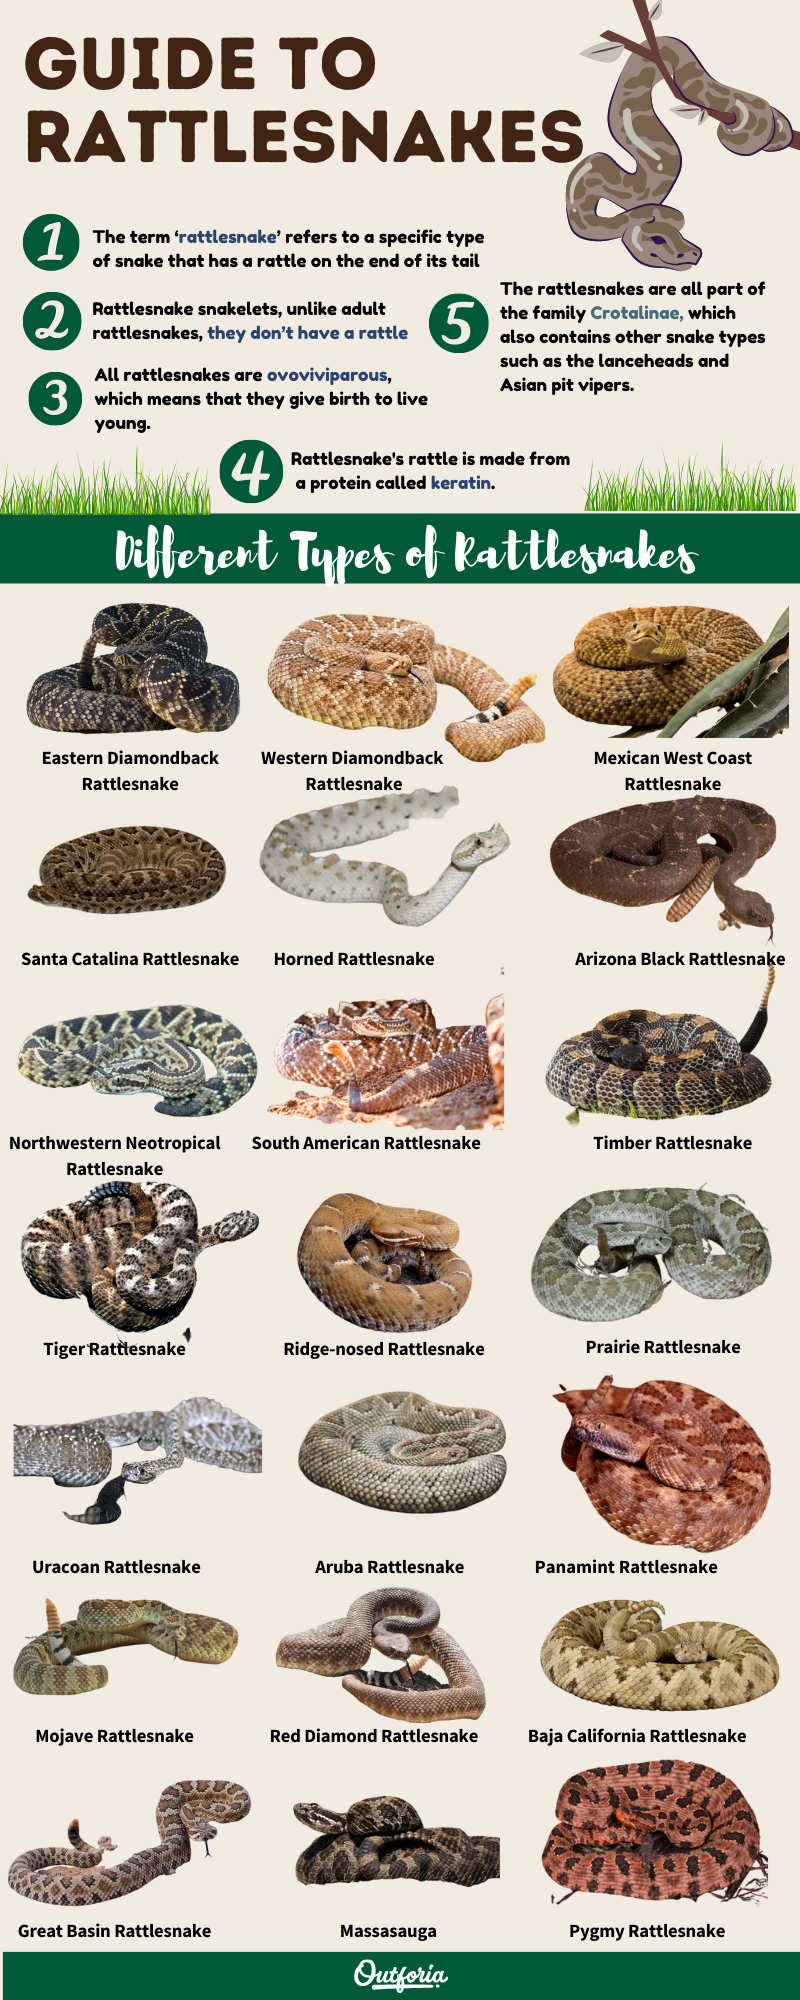 What Are the Different Types of Rattlesnakes?